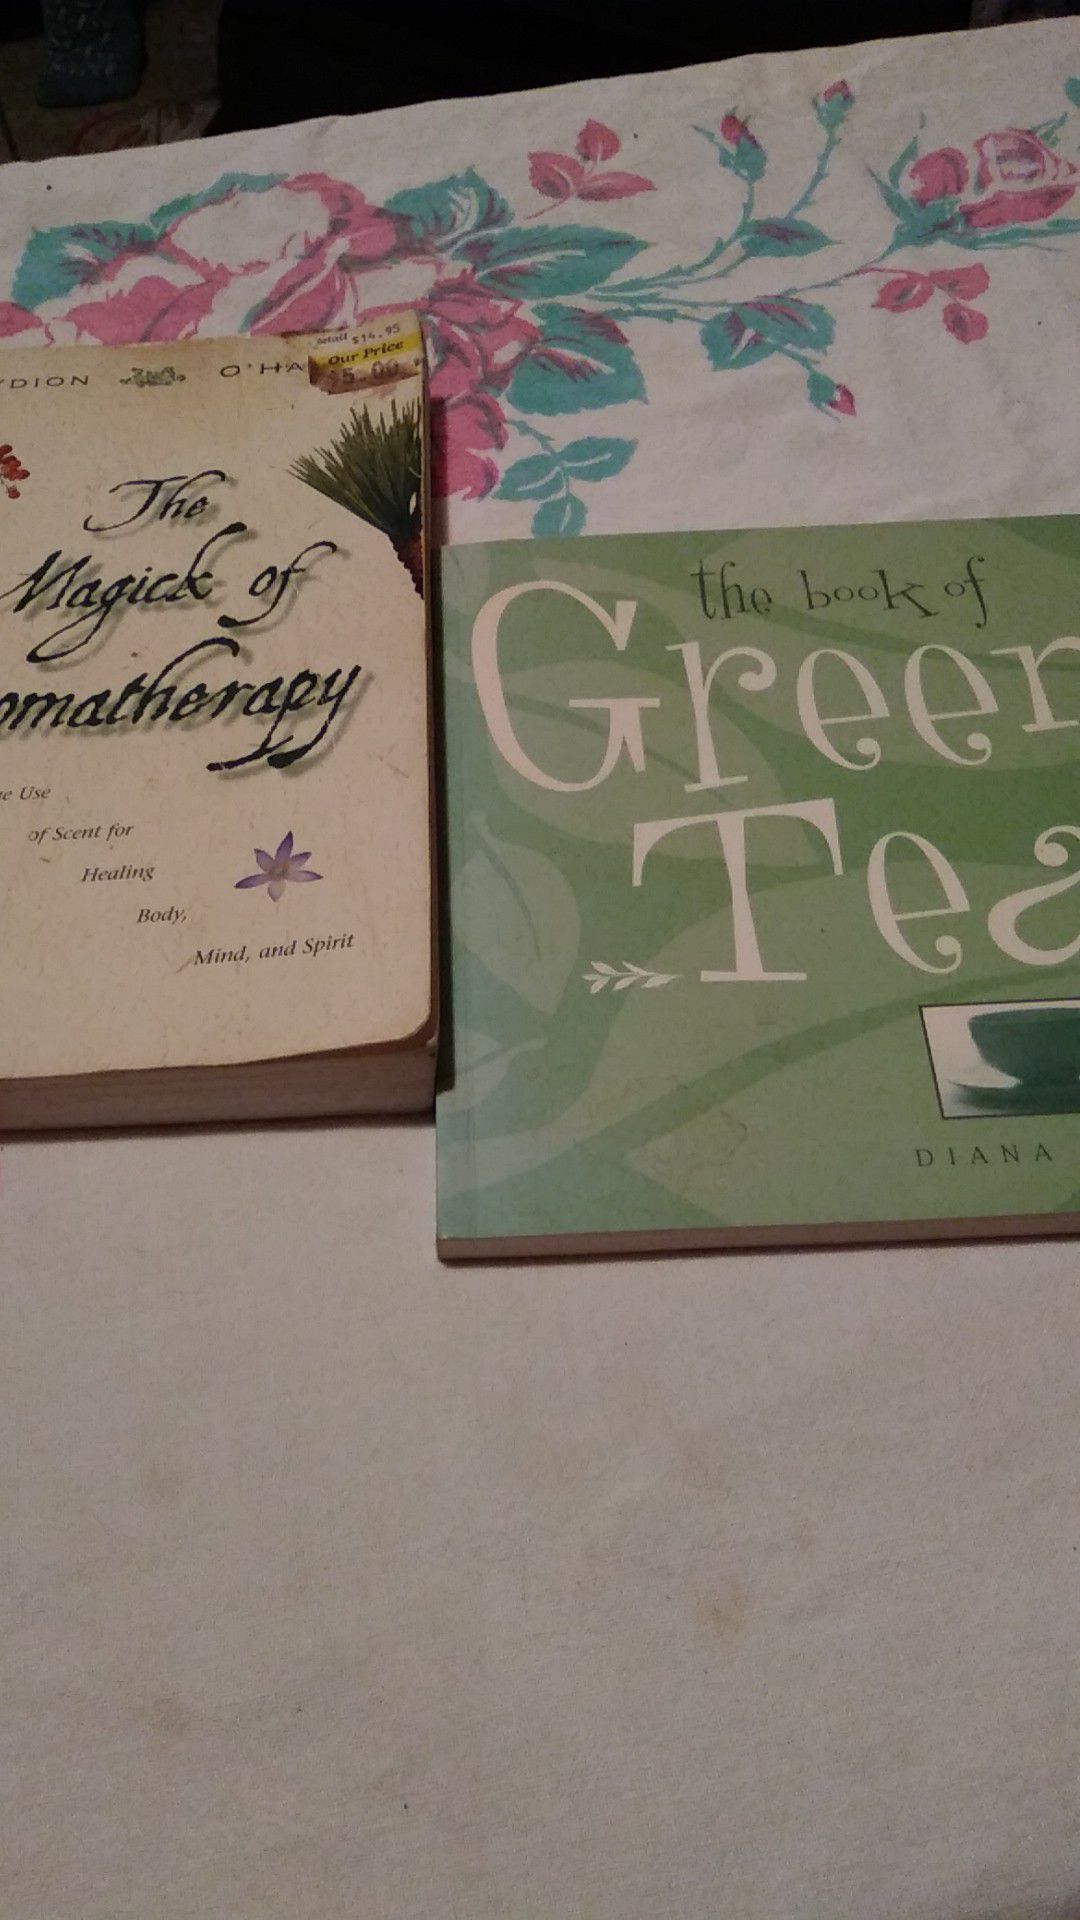 'The Magick of Aromatherapy', 'the Book of Green Tea'